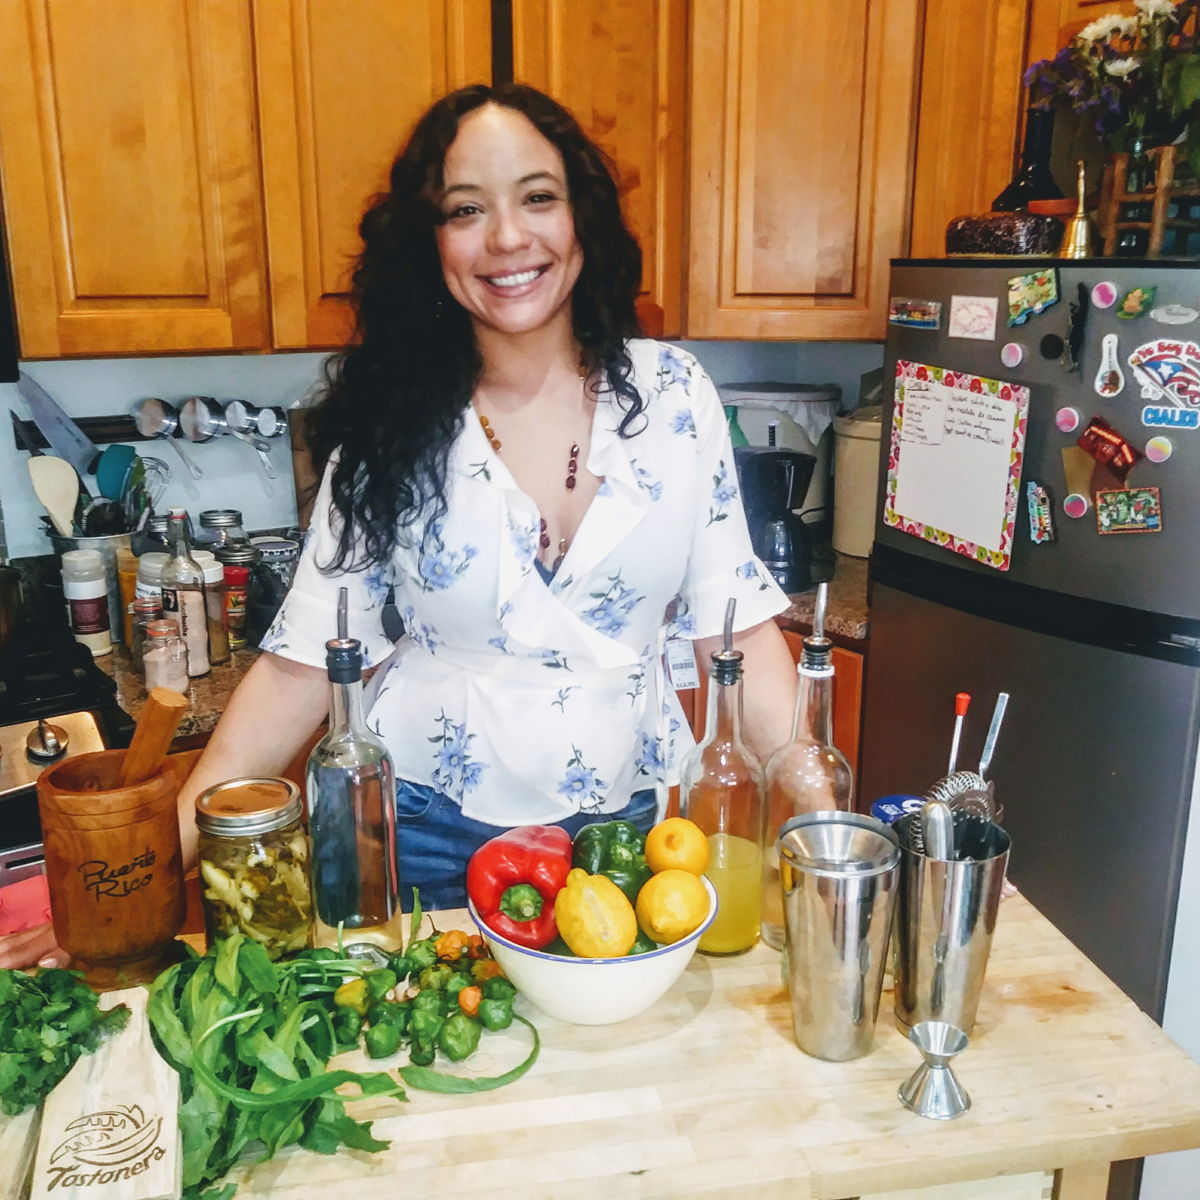 Puerto Rican Cooking Party with Cocktails & A Bartender